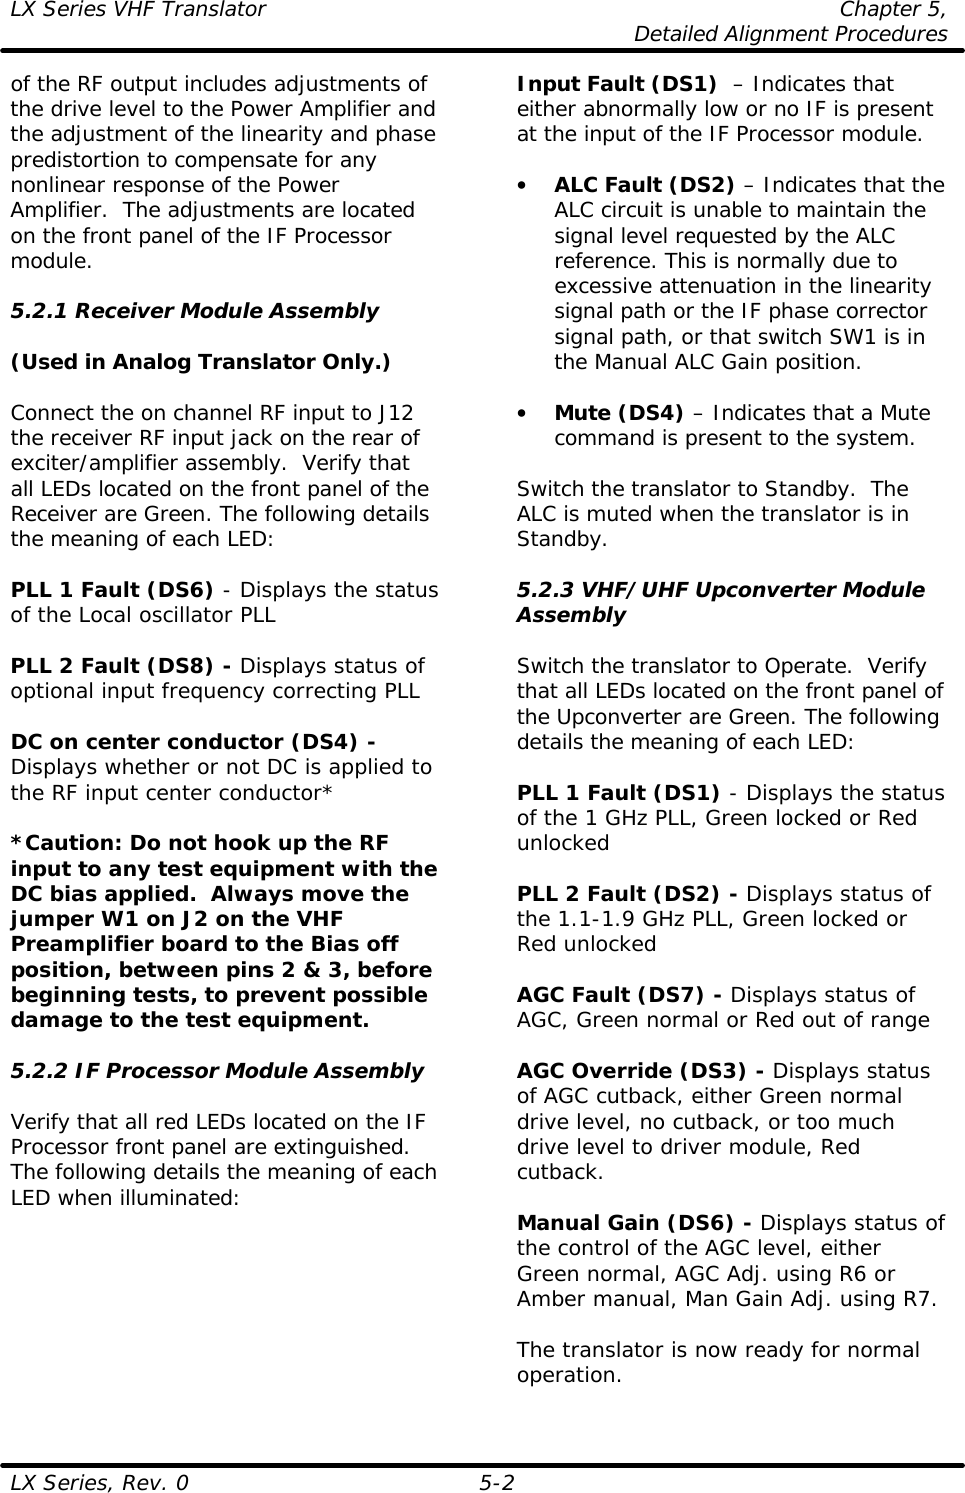 LX Series VHF Translator Chapter 5,  Detailed Alignment Procedures  LX Series, Rev. 0 5-2 of the RF output includes adjustments of the drive level to the Power Amplifier and the adjustment of the linearity and phase predistortion to compensate for any nonlinear response of the Power Amplifier.  The adjustments are located on the front panel of the IF Processor module.  5.2.1 Receiver Module Assembly  (Used in Analog Translator Only.)  Connect the on channel RF input to J12 the receiver RF input jack on the rear of exciter/amplifier assembly.  Verify that all LEDs located on the front panel of the Receiver are Green. The following details the meaning of each LED:  PLL 1 Fault (DS6) - Displays the status of the Local oscillator PLL  PLL 2 Fault (DS8) - Displays status of optional input frequency correcting PLL  DC on center conductor (DS4) - Displays whether or not DC is applied to the RF input center conductor*   *Caution: Do not hook up the RF input to any test equipment with the DC bias applied.  Always move the jumper W1 on J2 on the VHF Preamplifier board to the Bias off position, between pins 2 &amp; 3, before beginning tests, to prevent possible damage to the test equipment.  5.2.2 IF Processor Module Assembly  Verify that all red LEDs located on the IF Processor front panel are extinguished. The following details the meaning of each LED when illuminated: Input Fault (DS1)  – Indicates that either abnormally low or no IF is present at the input of the IF Processor module.  • ALC Fault (DS2) – Indicates that the ALC circuit is unable to maintain the signal level requested by the ALC reference. This is normally due to excessive attenuation in the linearity signal path or the IF phase corrector signal path, or that switch SW1 is in the Manual ALC Gain position.  • Mute (DS4) – Indicates that a Mute command is present to the system.  Switch the translator to Standby.  The ALC is muted when the translator is in Standby.  5.2.3 VHF/UHF Upconverter Module Assembly  Switch the translator to Operate.  Verify that all LEDs located on the front panel of the Upconverter are Green. The following details the meaning of each LED:  PLL 1 Fault (DS1) - Displays the status of the 1 GHz PLL, Green locked or Red unlocked  PLL 2 Fault (DS2) - Displays status of the 1.1-1.9 GHz PLL, Green locked or Red unlocked  AGC Fault (DS7) - Displays status of AGC, Green normal or Red out of range   AGC Override (DS3) - Displays status of AGC cutback, either Green normal drive level, no cutback, or too much drive level to driver module, Red cutback.  Manual Gain (DS6) - Displays status of the control of the AGC level, either Green normal, AGC Adj. using R6 or Amber manual, Man Gain Adj. using R7.  The translator is now ready for normal operation. 